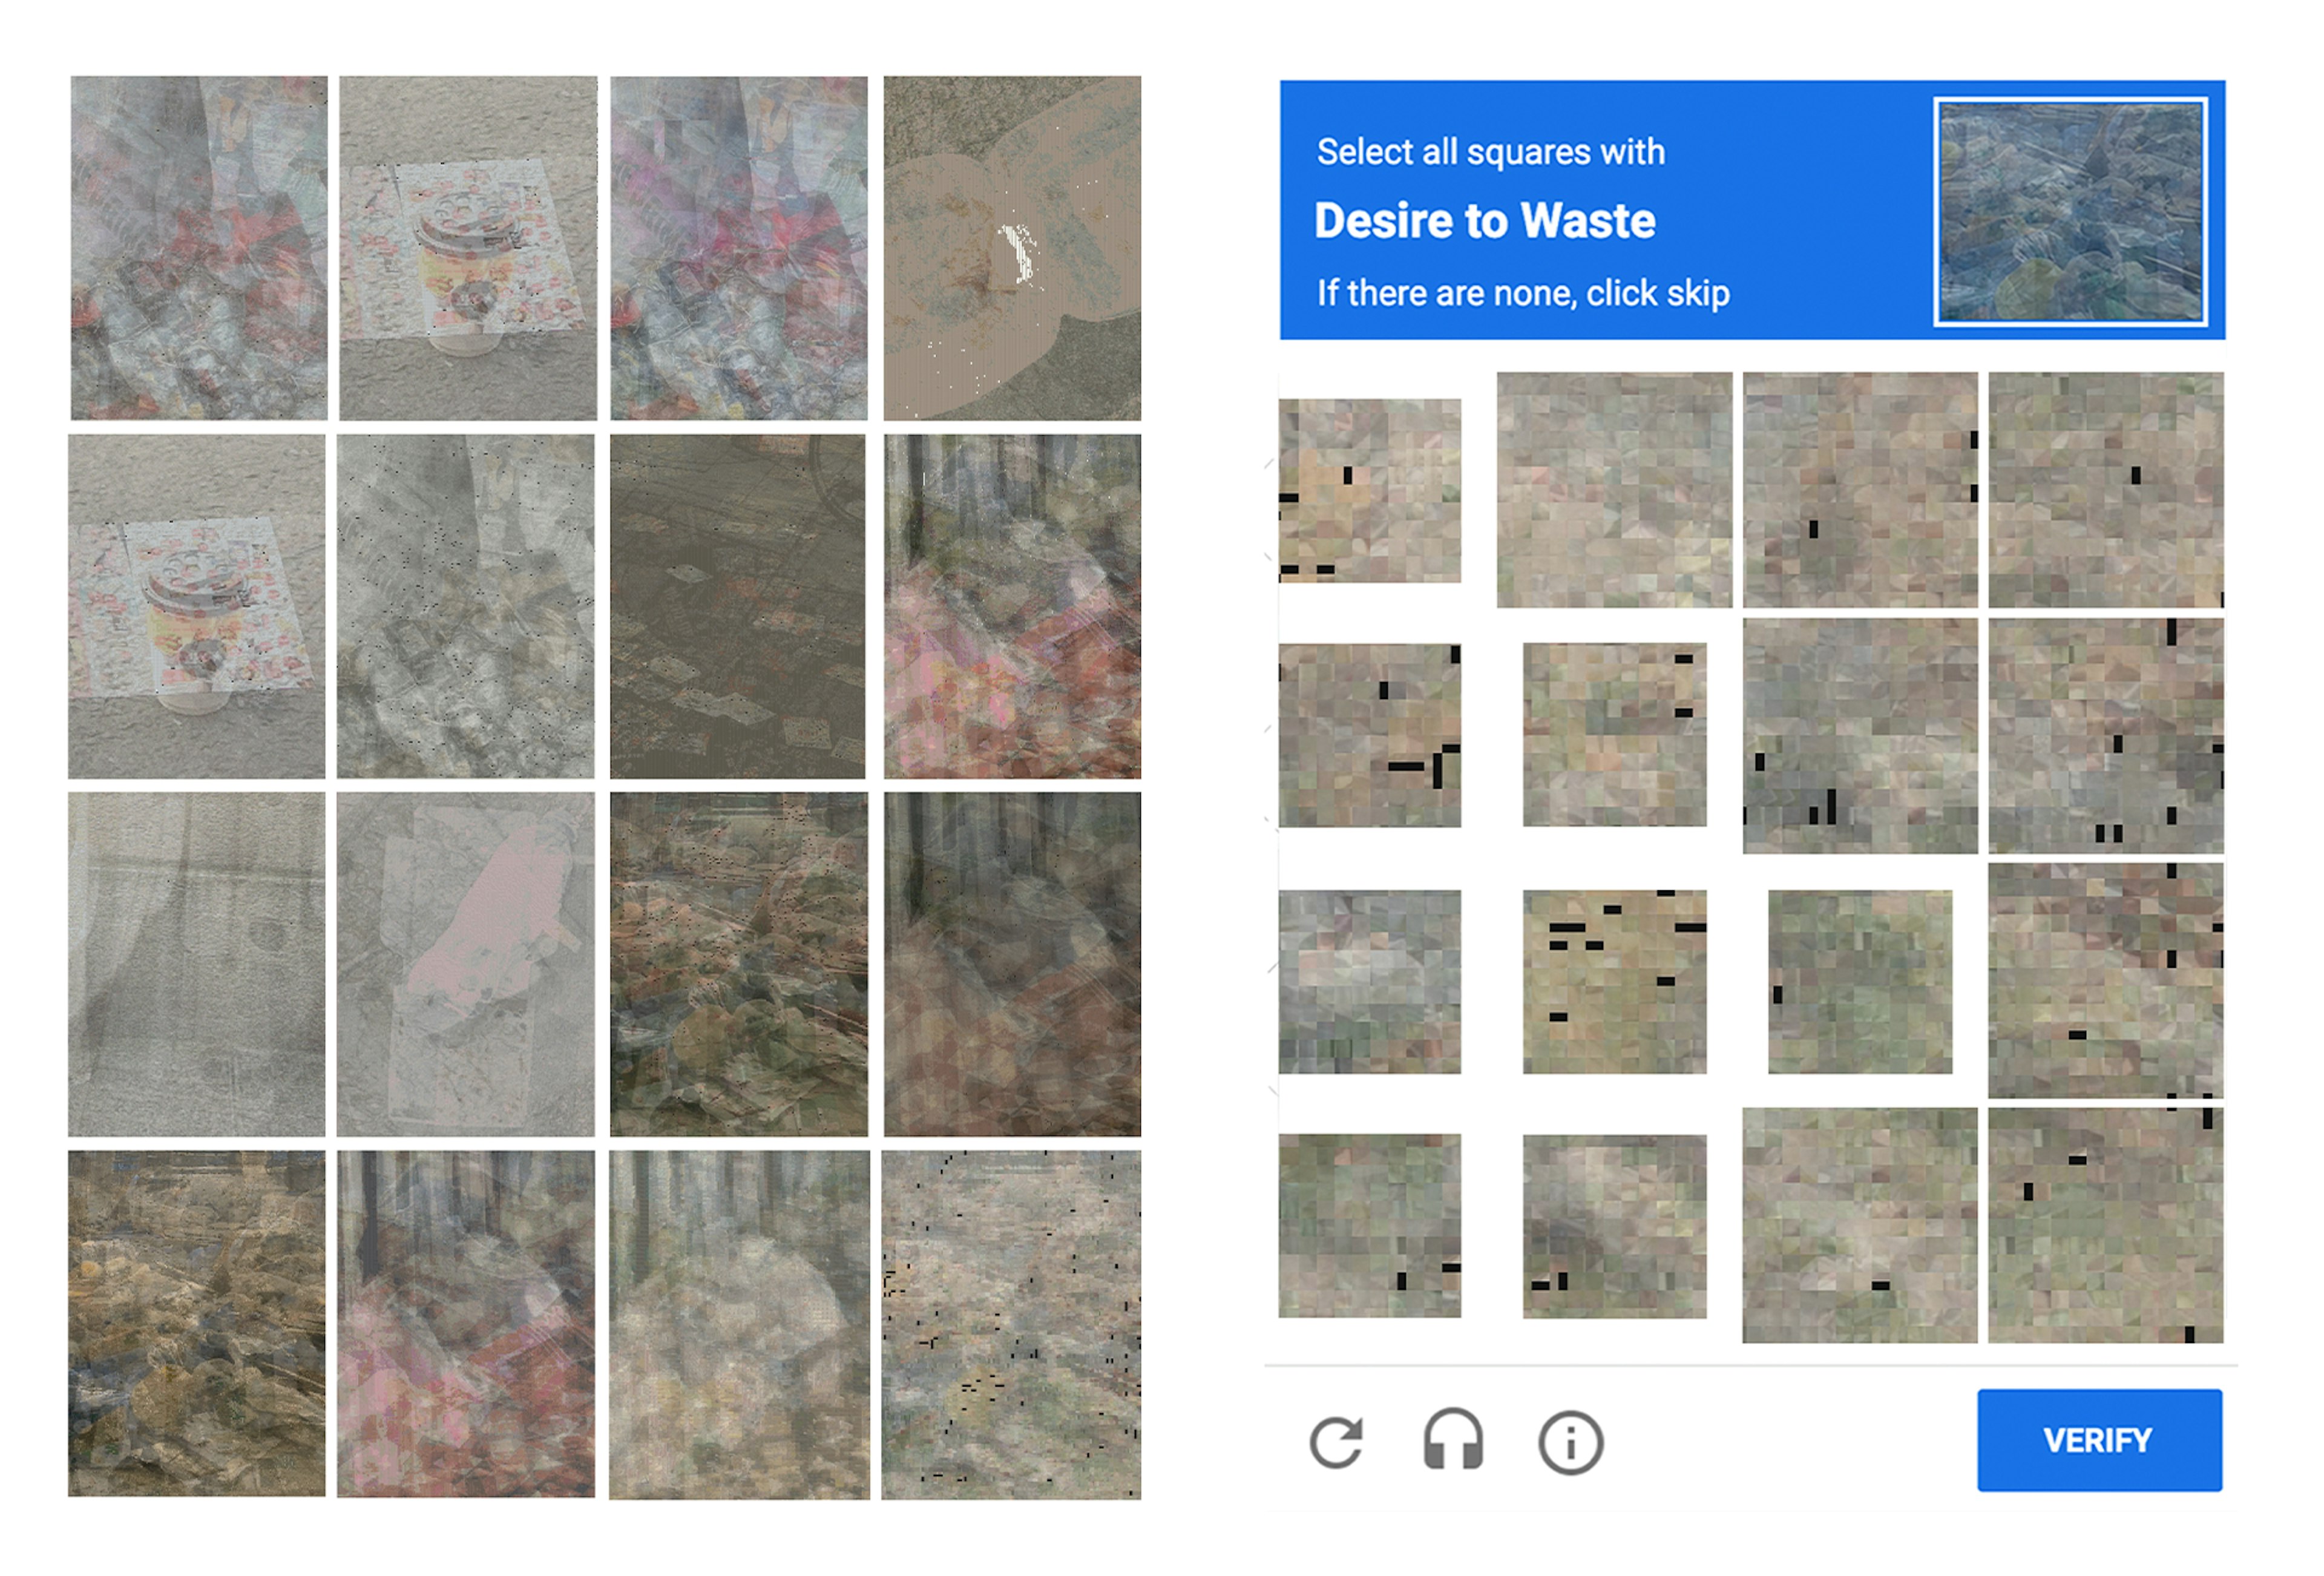 Image collage applied to reCAPTCHA layout.